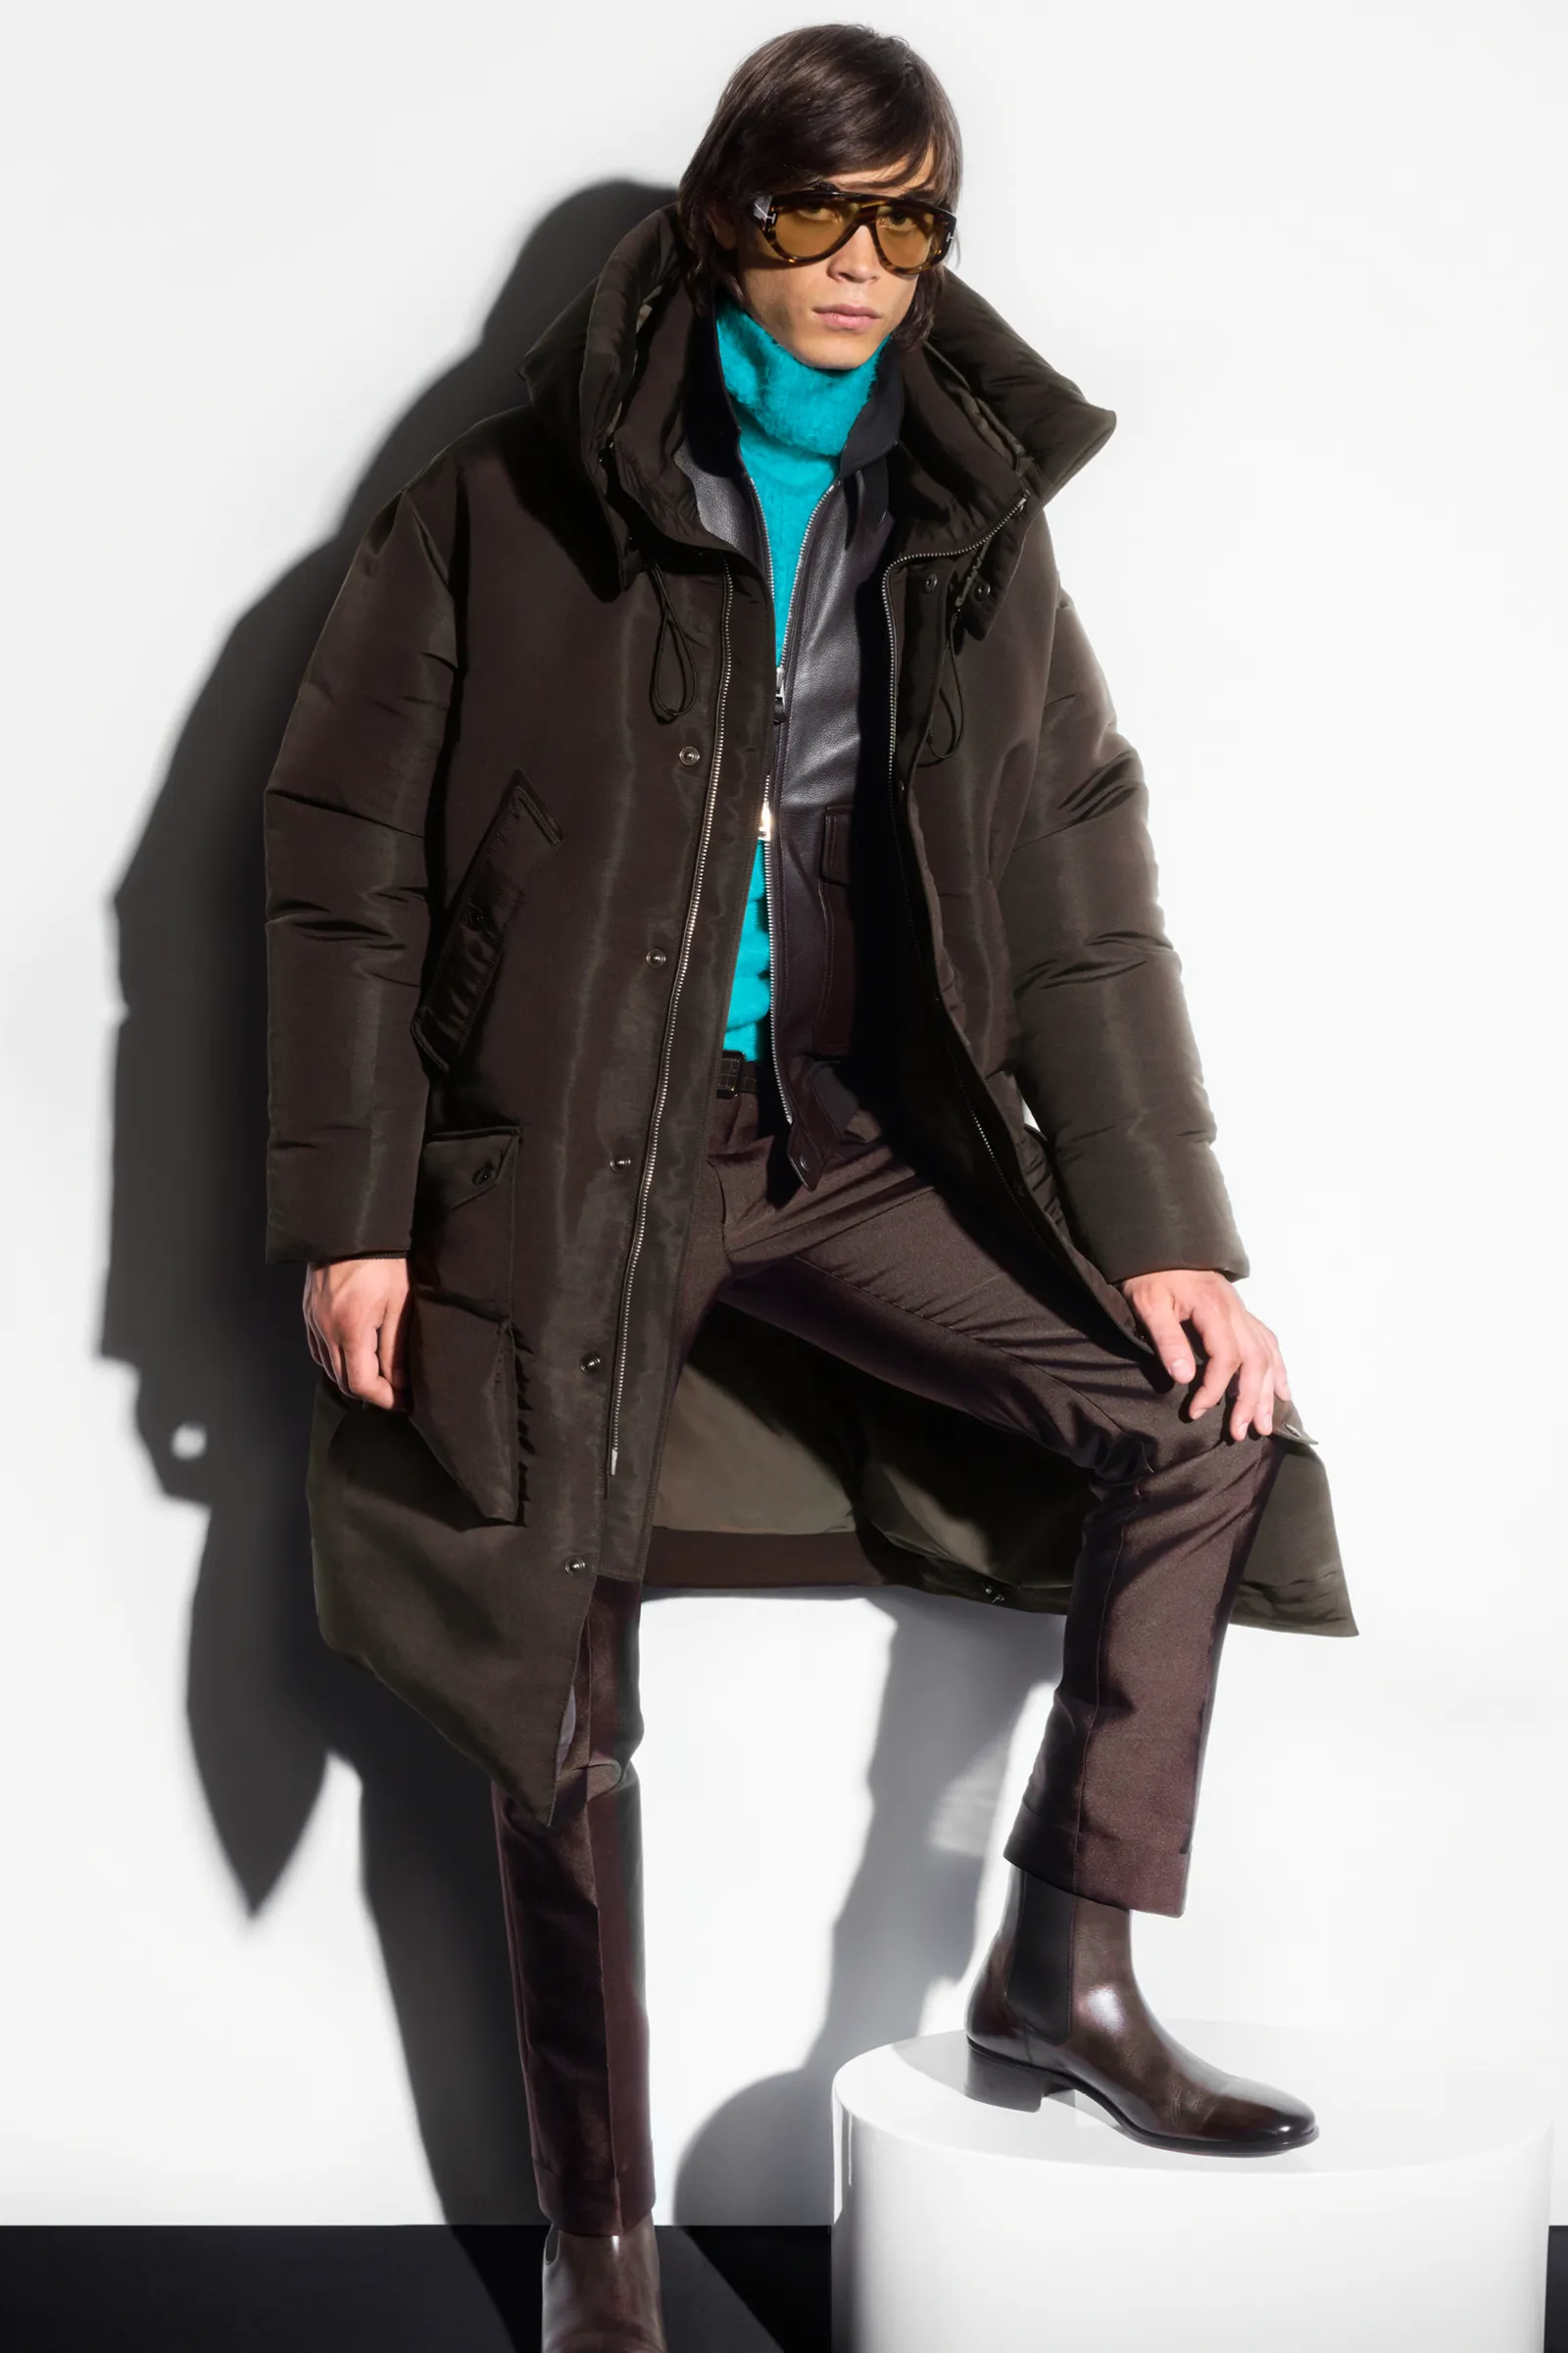 00016-tom-ford-fall-22-mens-nyc-credit-brand.png